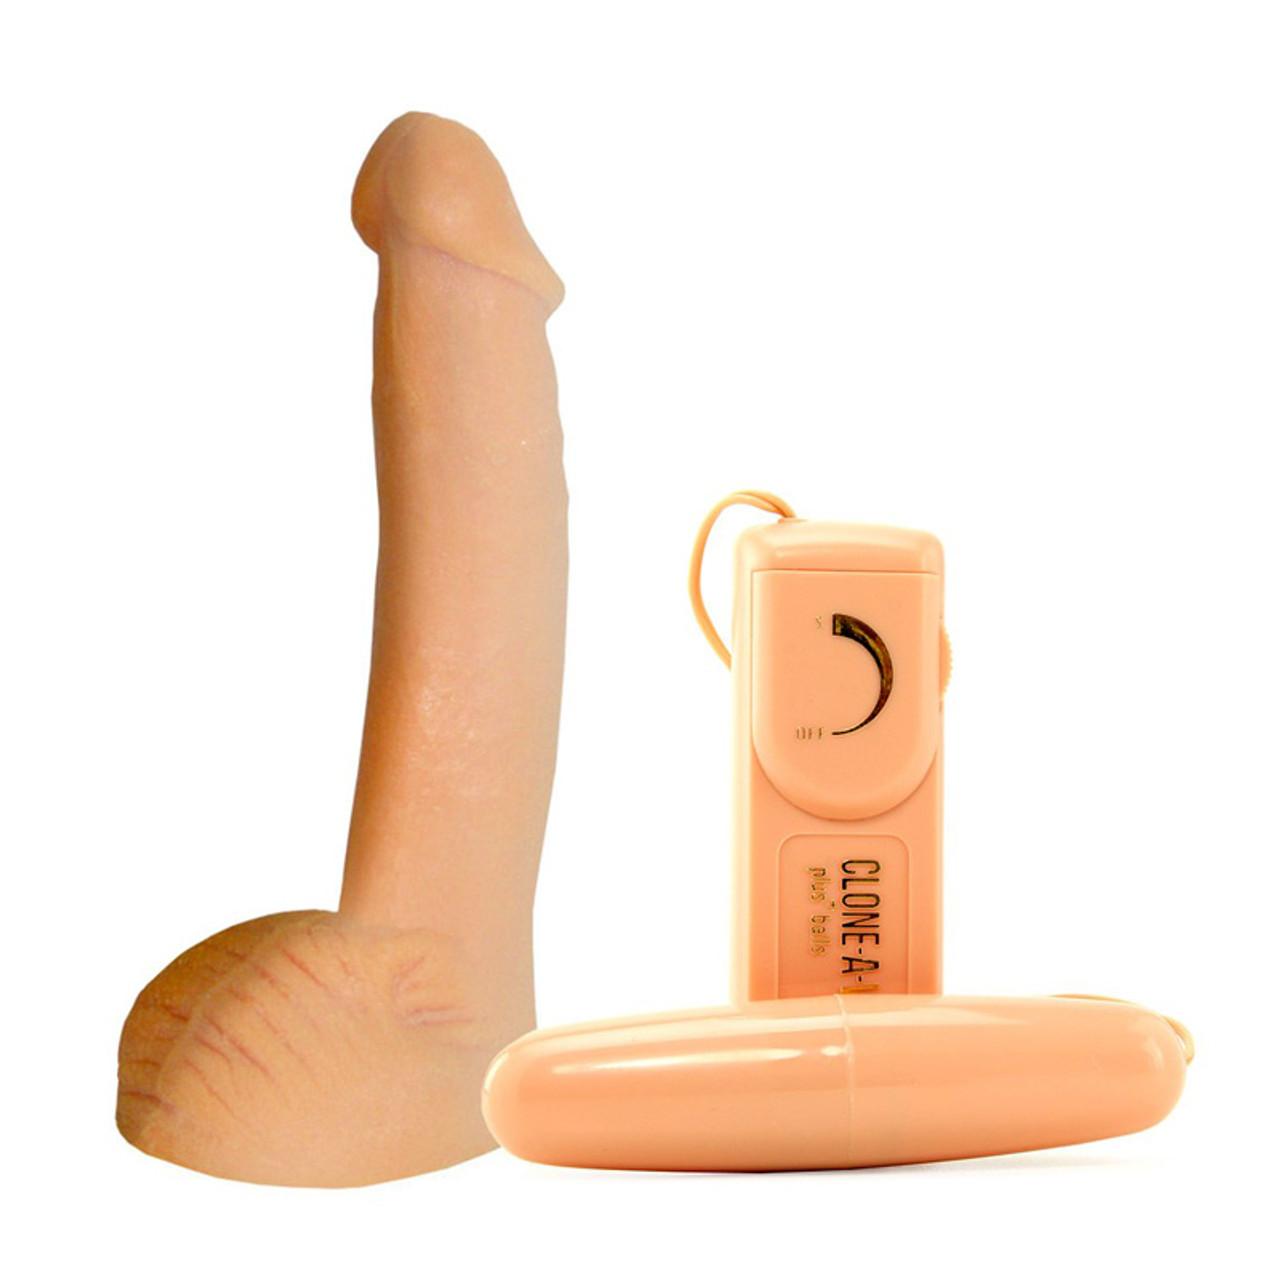 Clone-A-Willy - Dildos & More - Toys